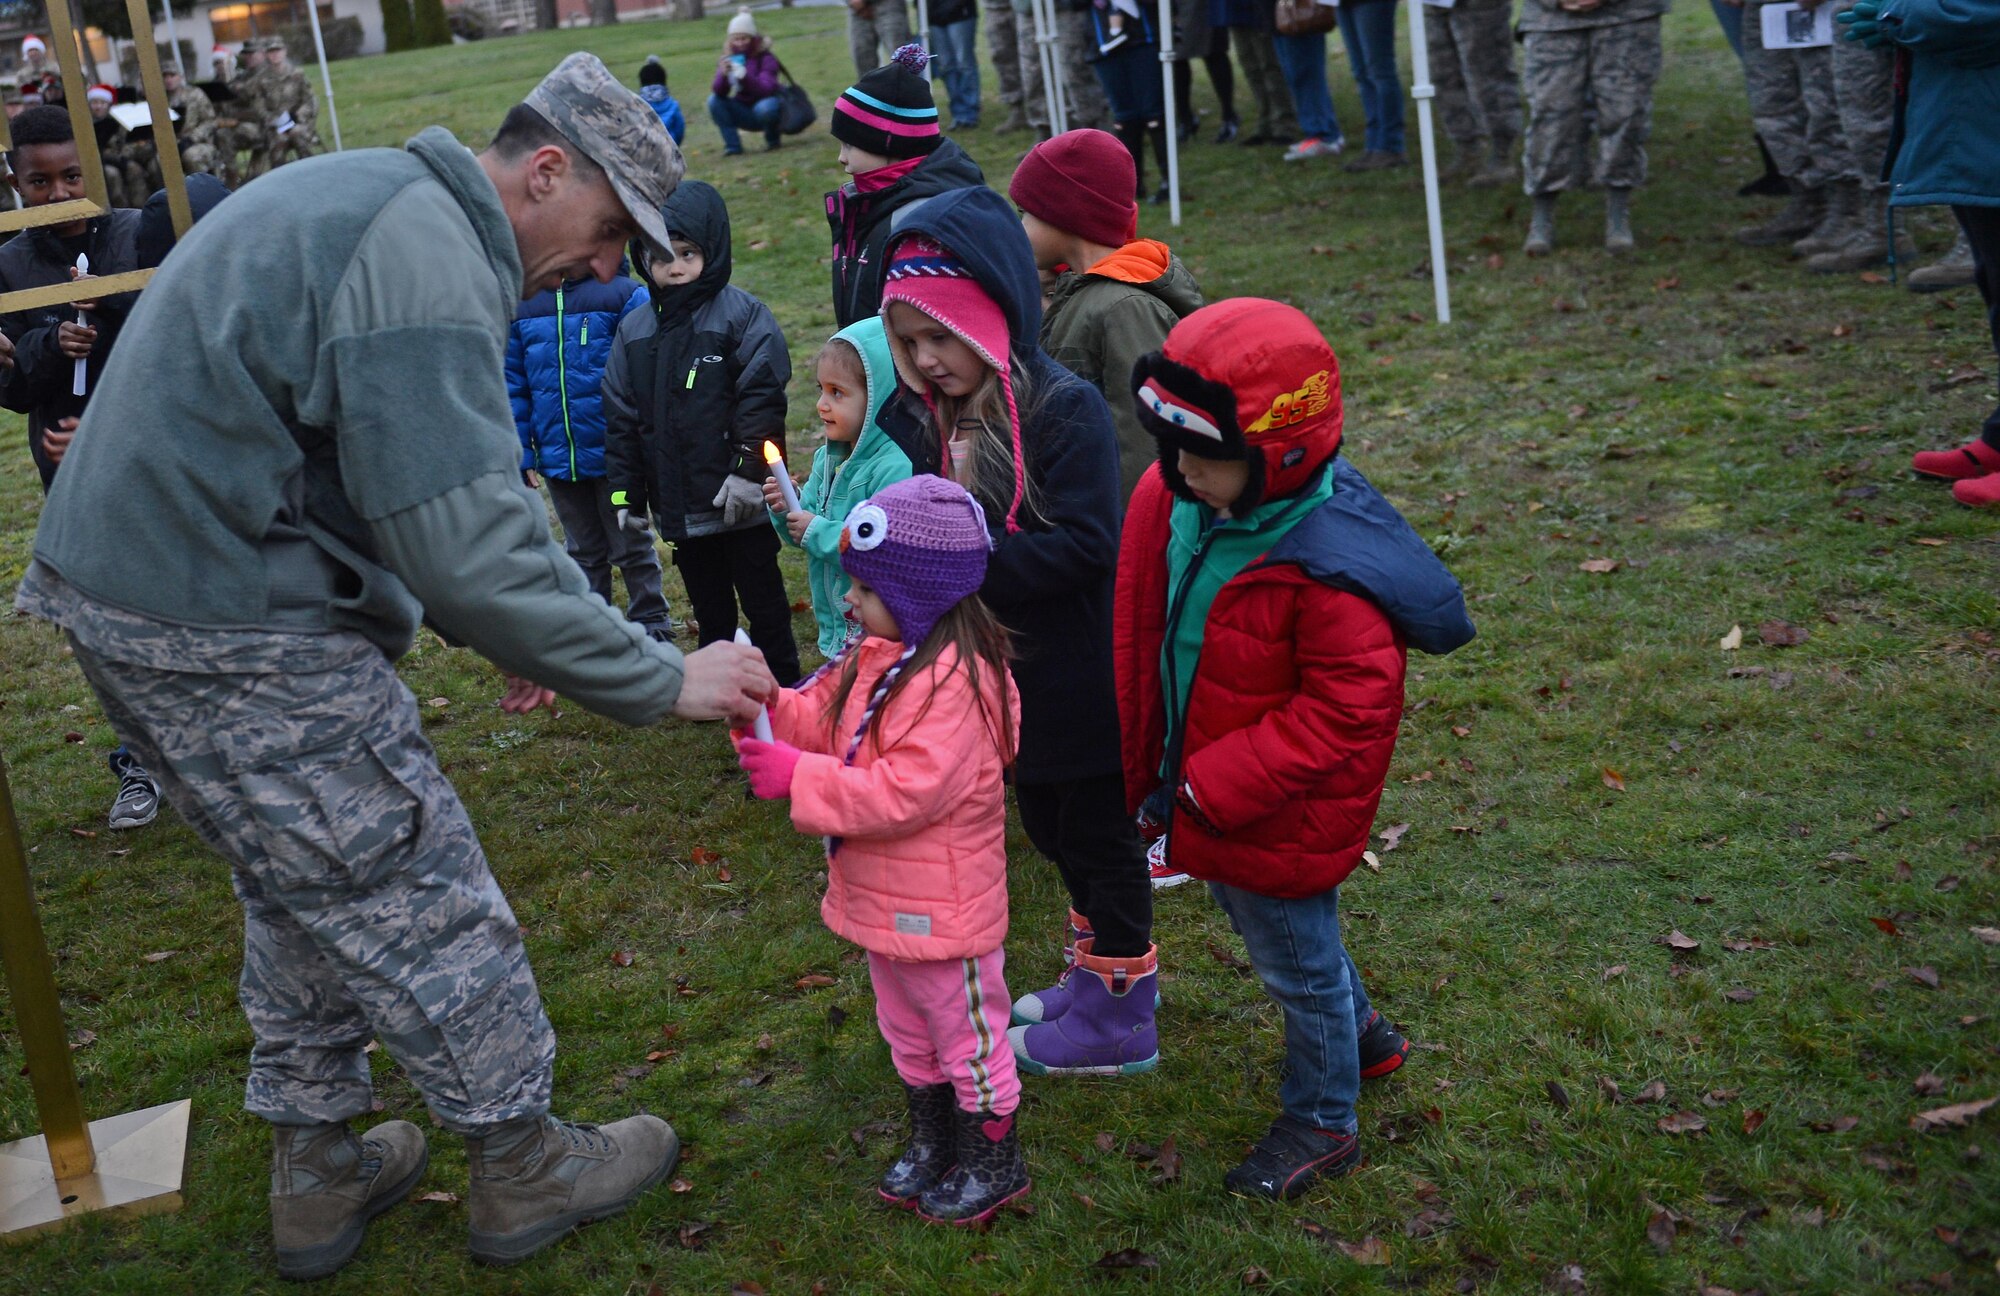 Col. Leonard Kosinski, 62nd Airlift Wing commander, helps children light candles for the Menorah during the McChord Field Annual Tree Lighting Ceremony Dec. 5, 2016 at Joint Base Lewis-McChord, Wash. Along with the Menorah, a Christmas tree was also lit during the ceremony. (U.S. Air Force photo/Senior Airman Divine Cox)